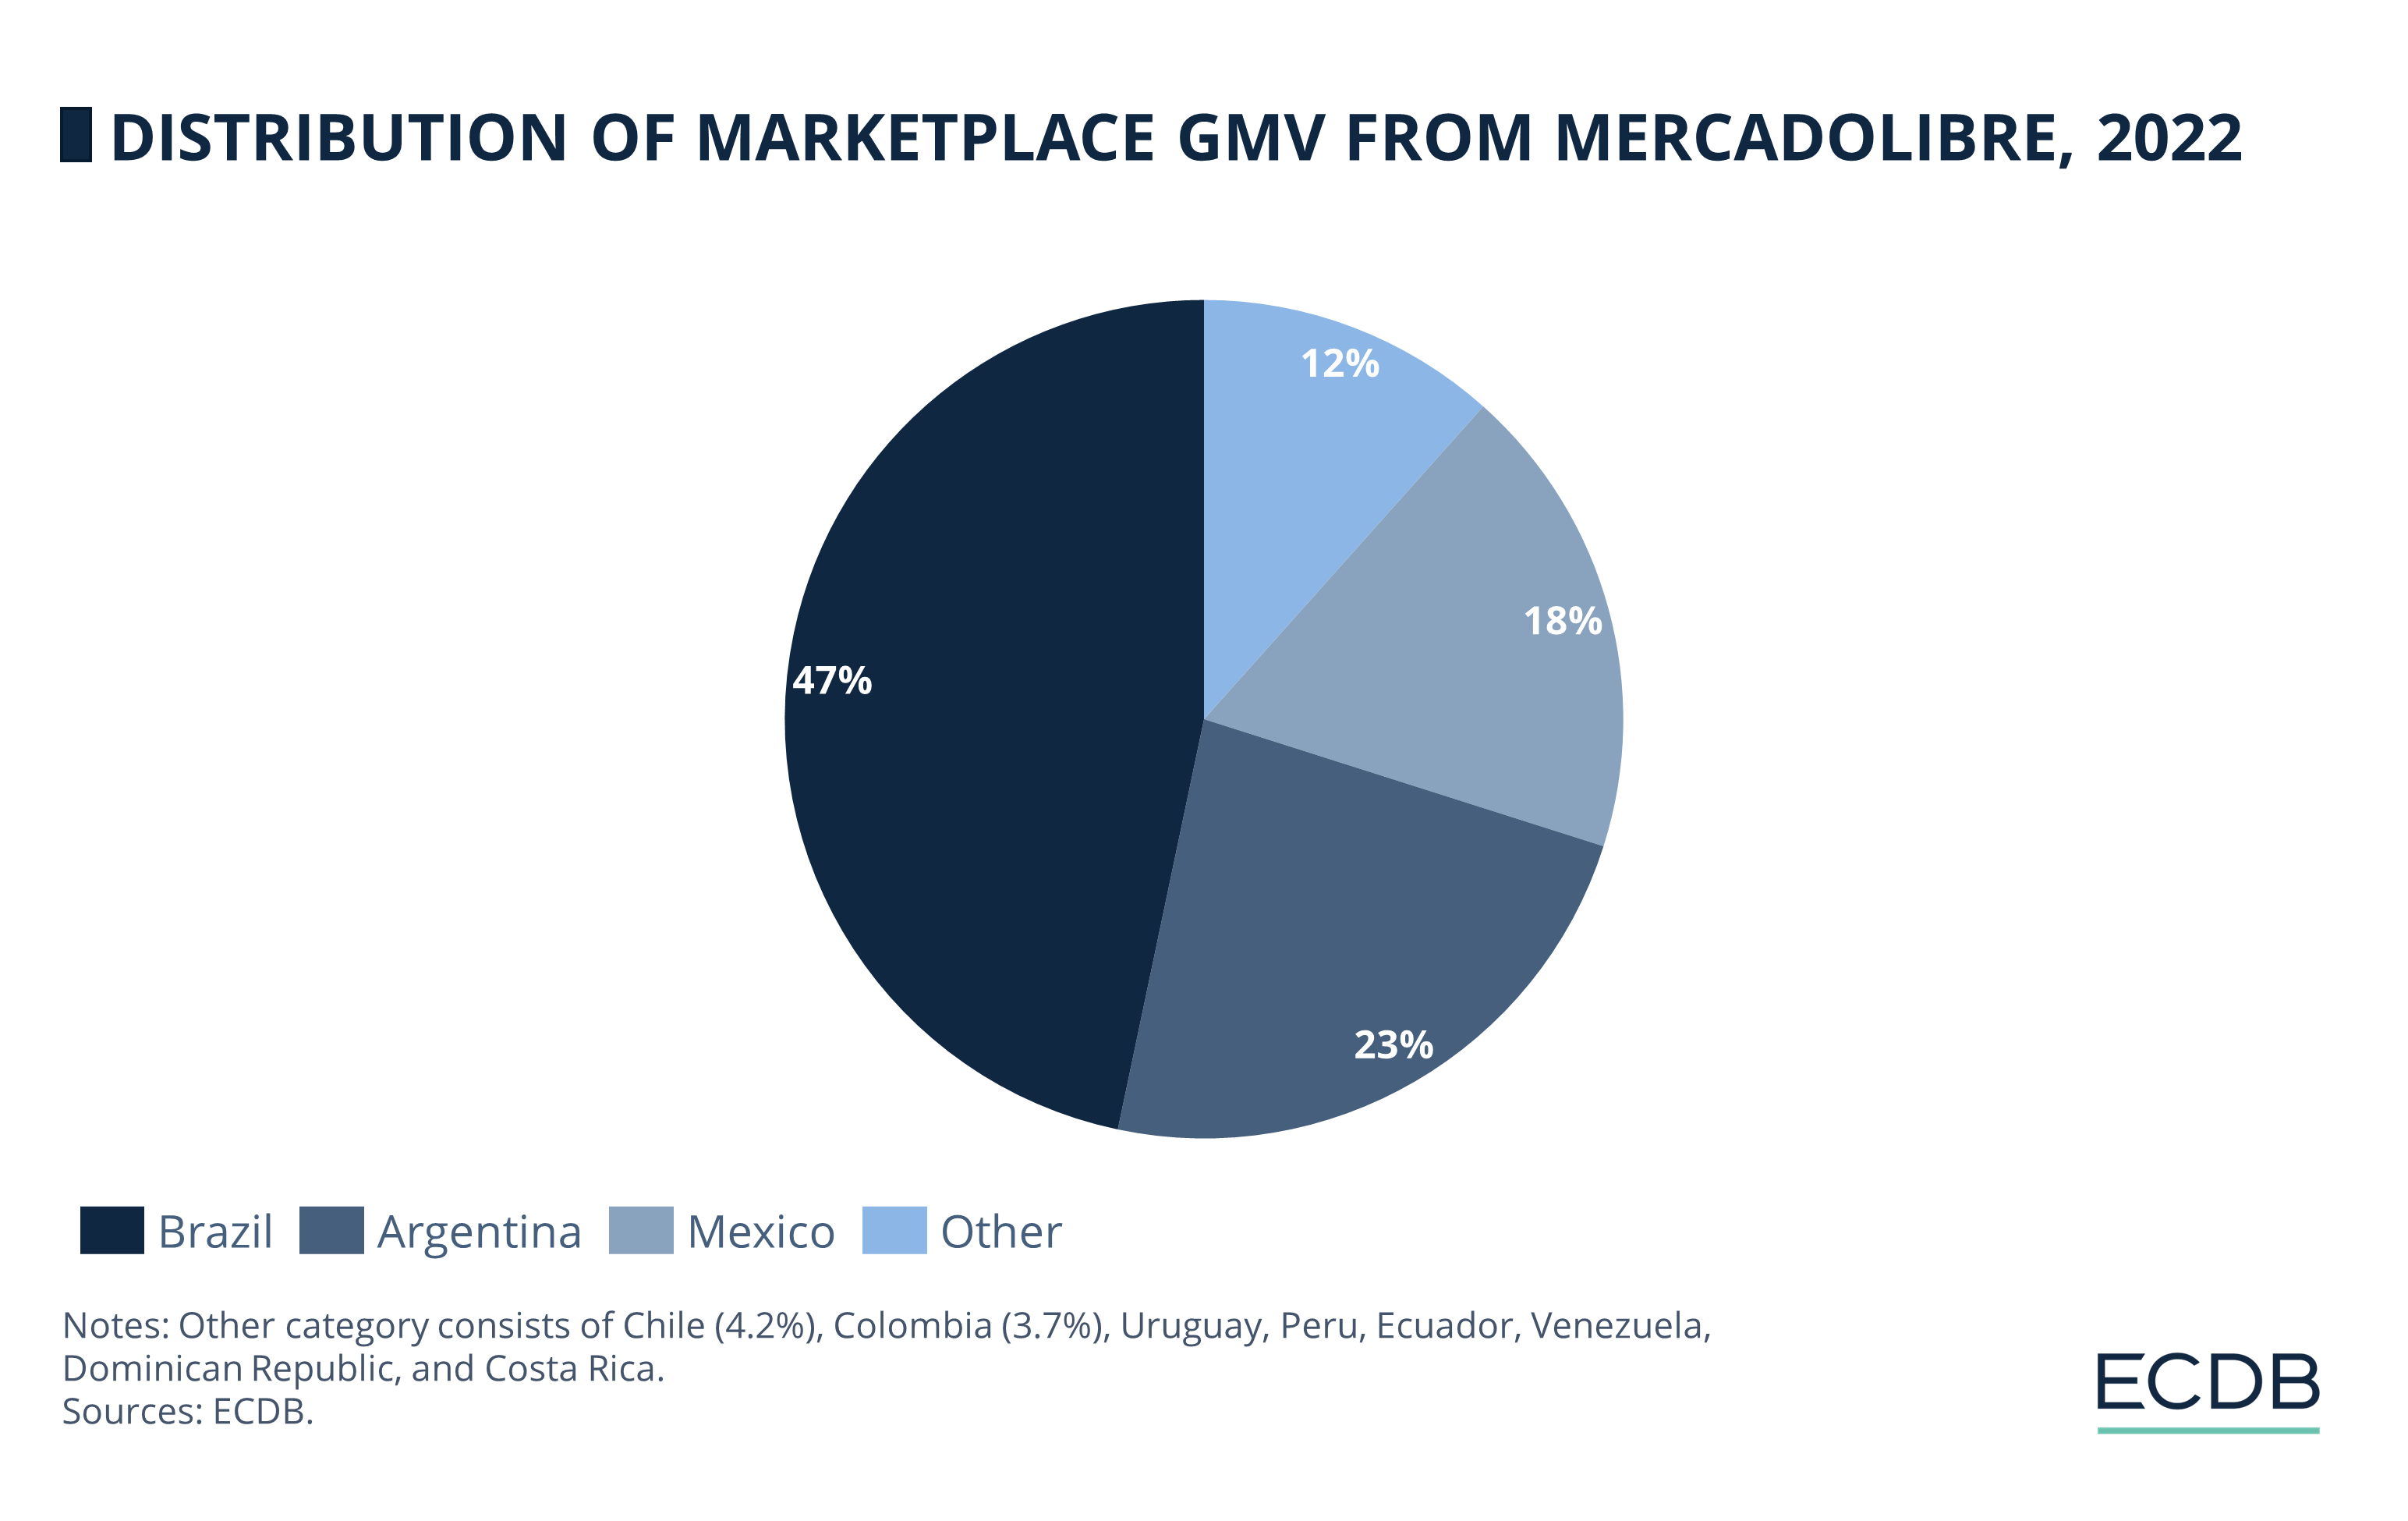 Distribution of Marketplace GMV from MercadoLibre, 2022